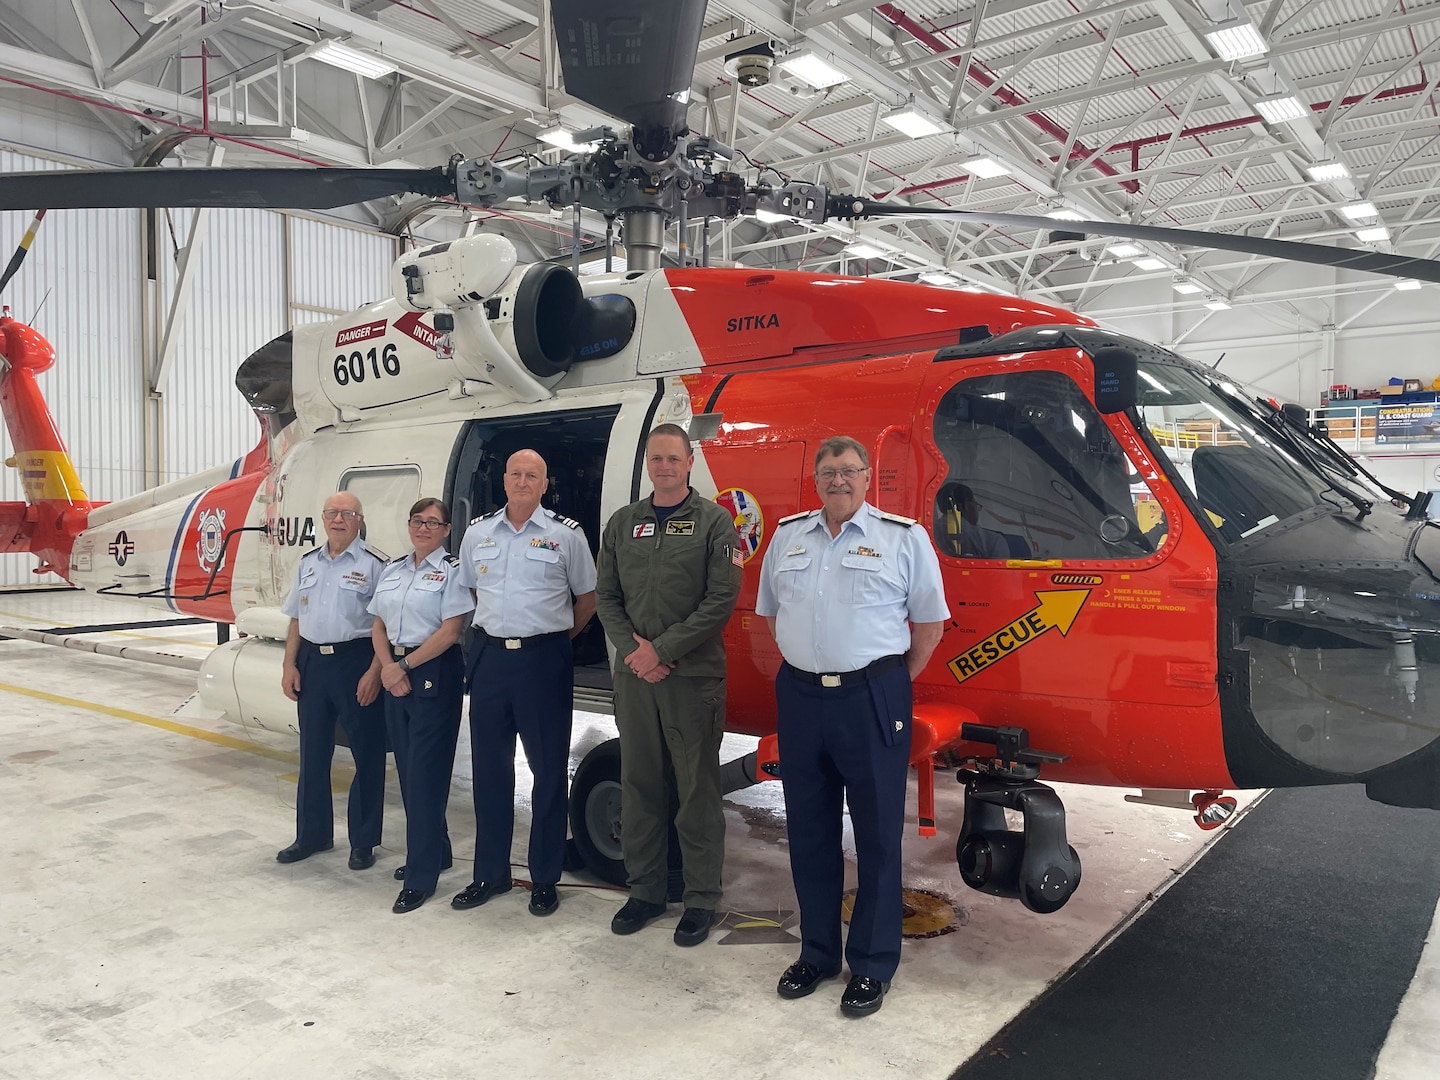 Auxiliarist Chester “Chet” L. Williams (center) at Coast Guard Air Station Sitka on his tour of Southeast Alaska, with the mission of growing the Auxiliary and help further support active-duty personnel. U.S. Coast Guard photo, courtesy Lt. Cmdr. Christopher Schleck